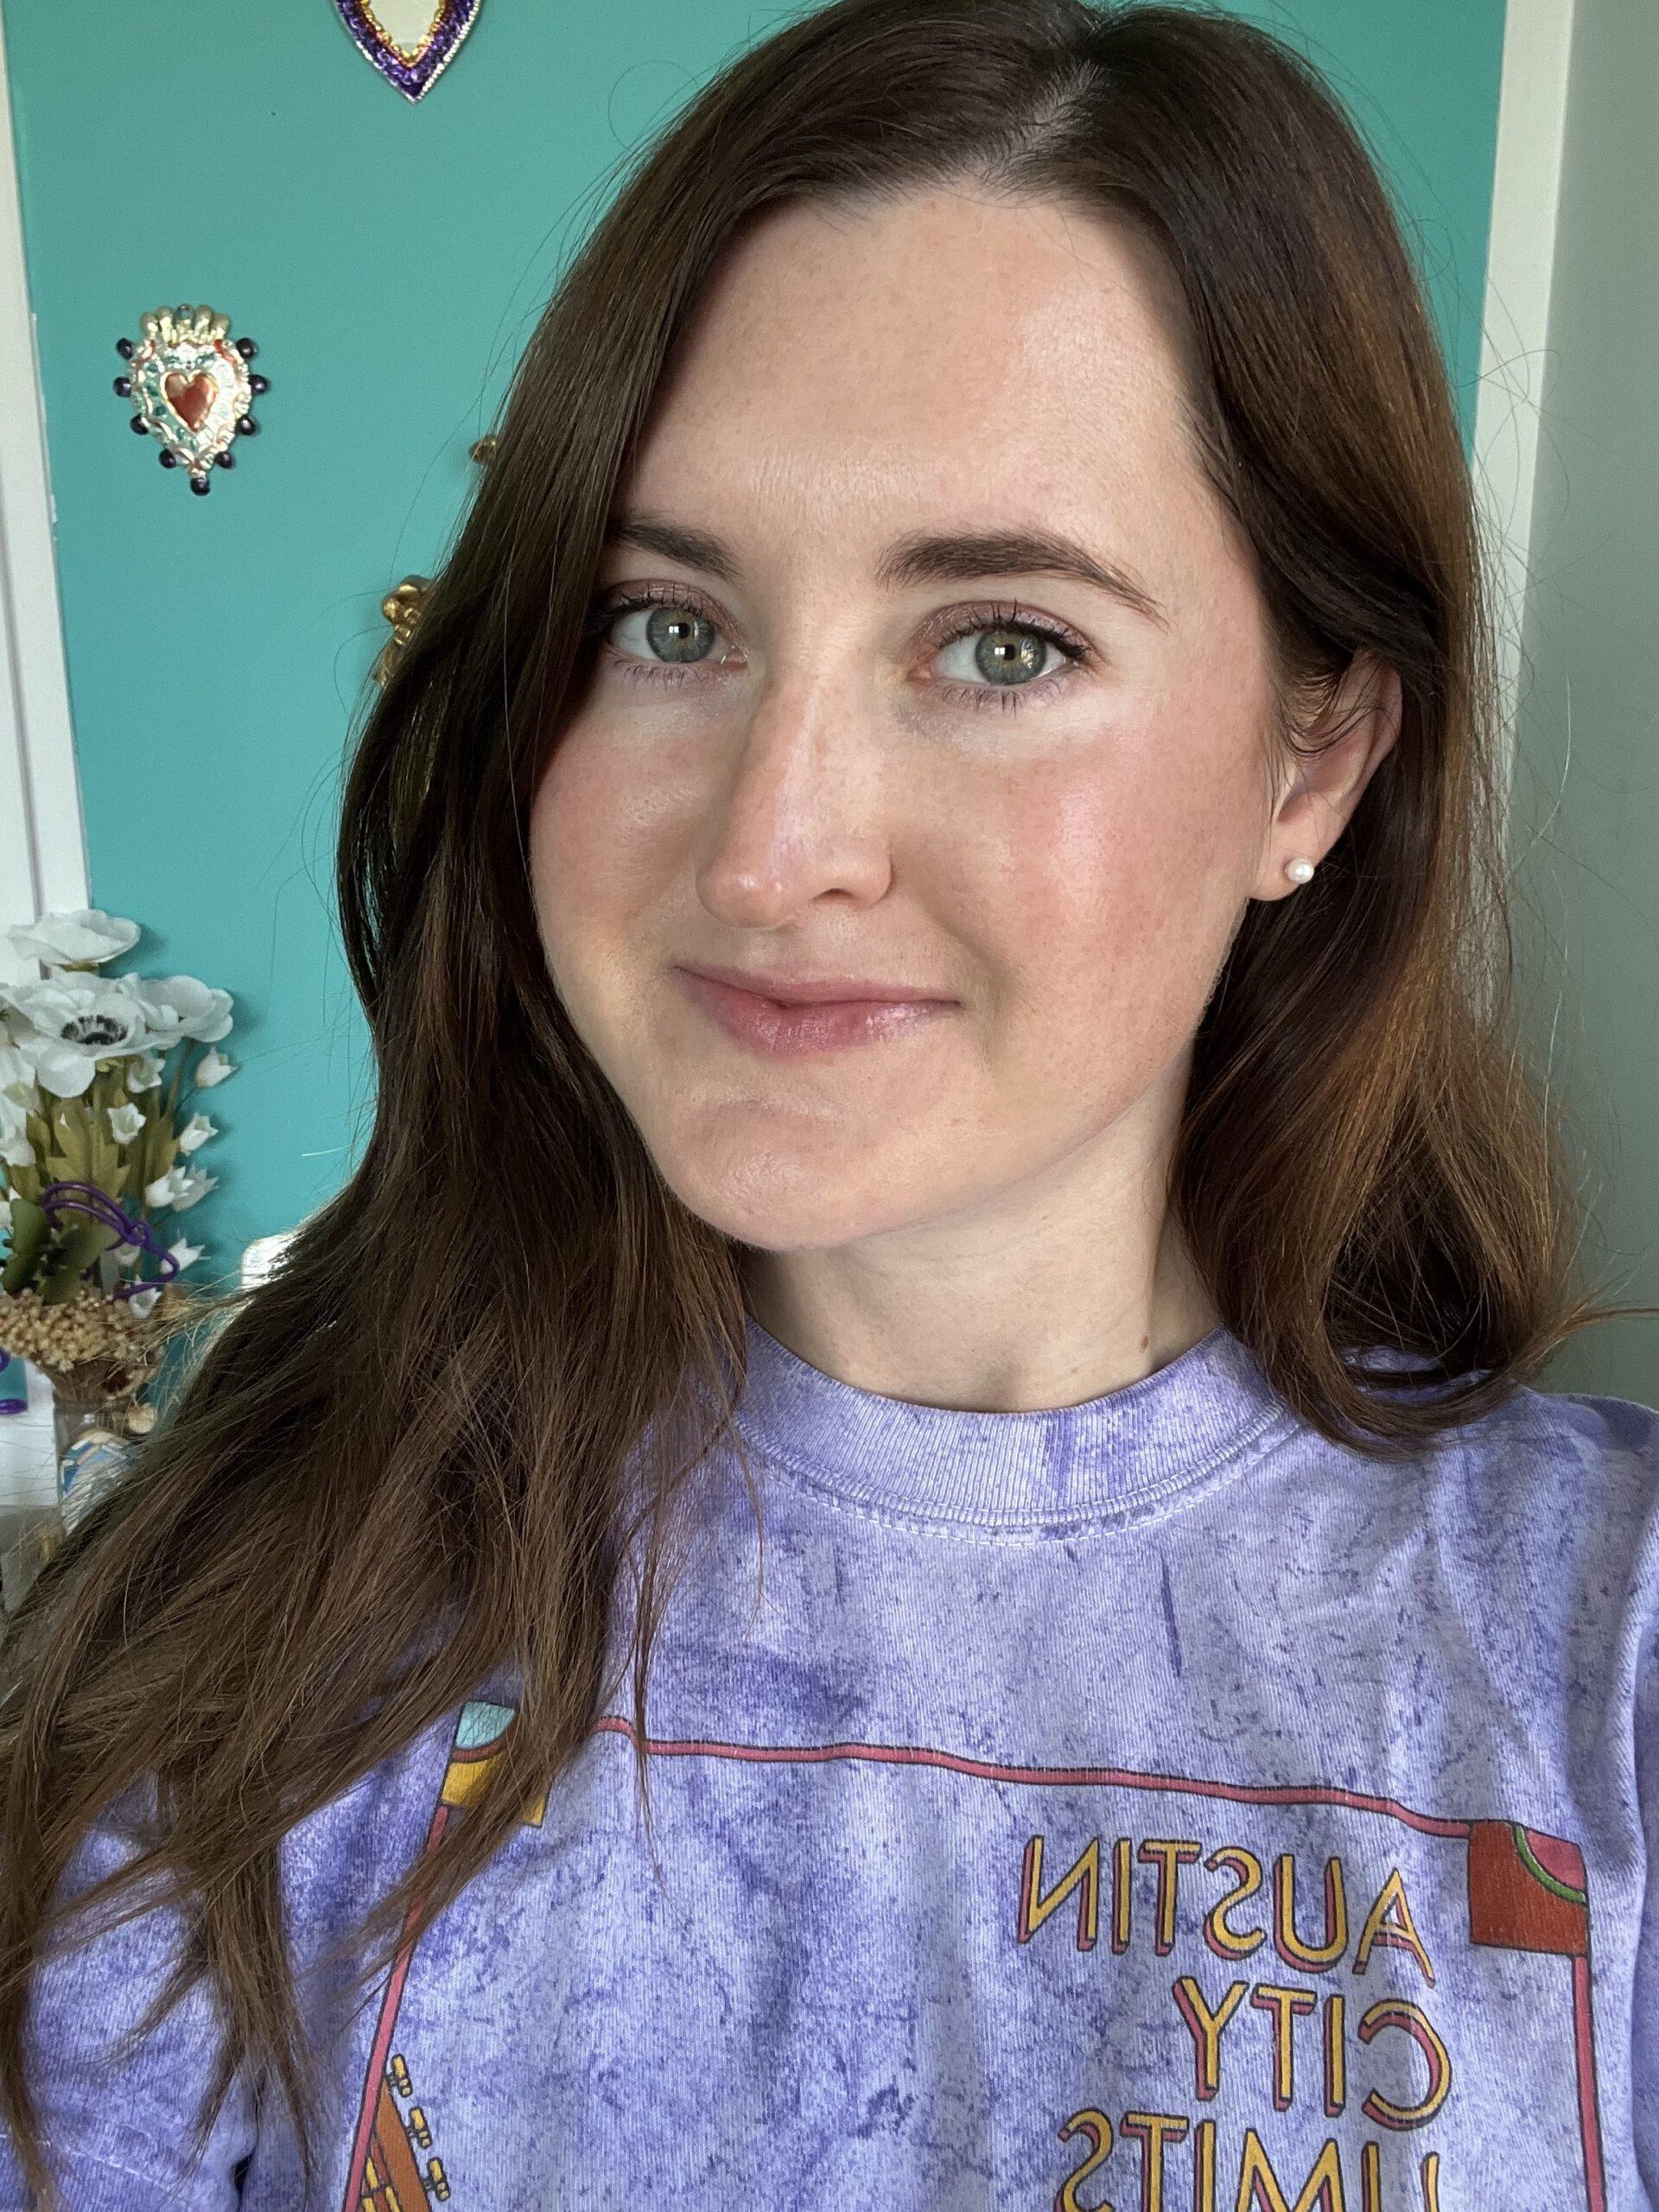 Caliray Primer Review on face